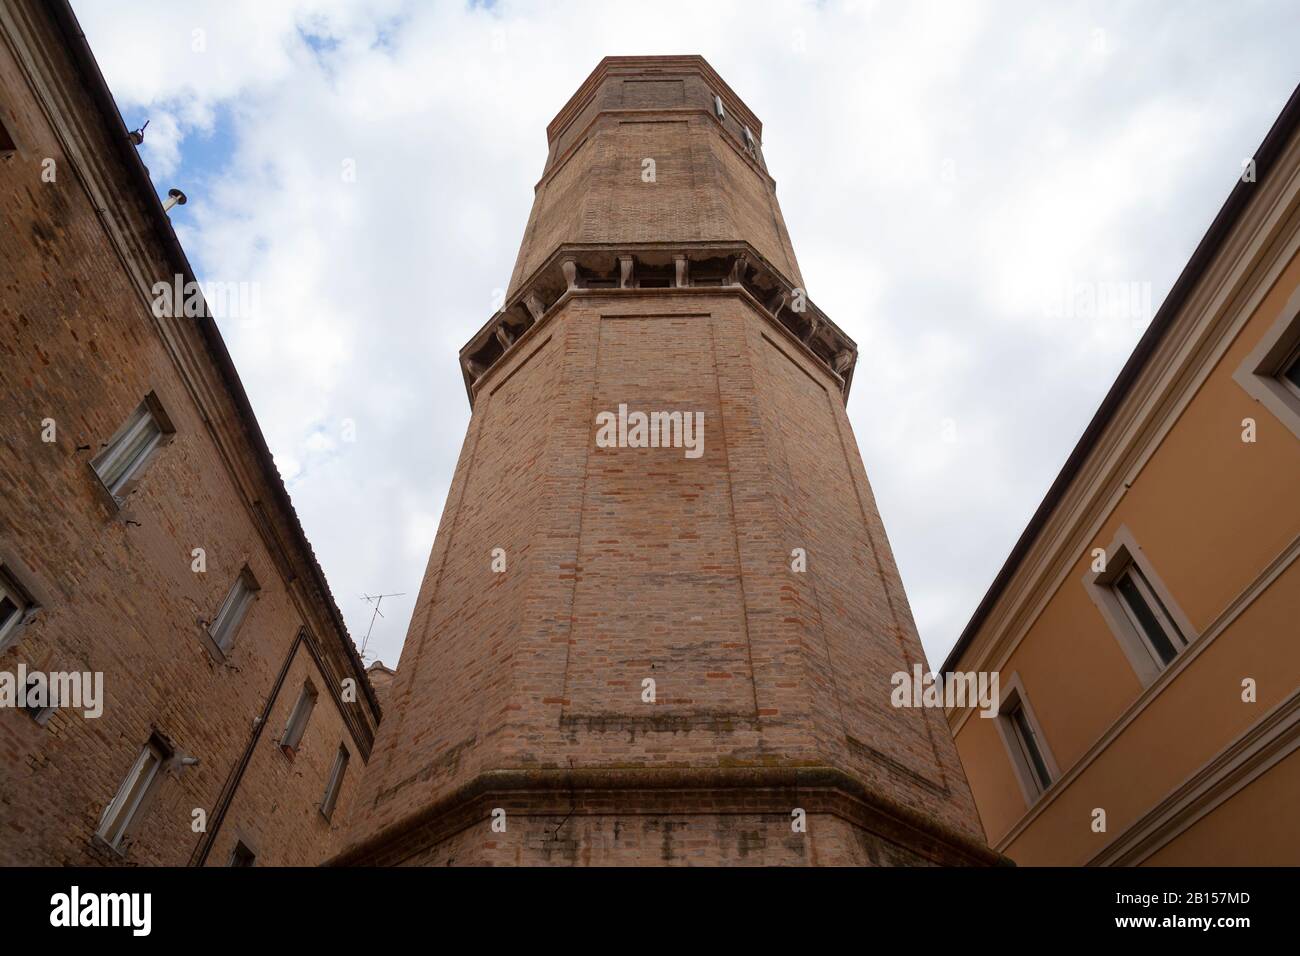 Solitario High Resolution Stock Photography and Images - Alamy